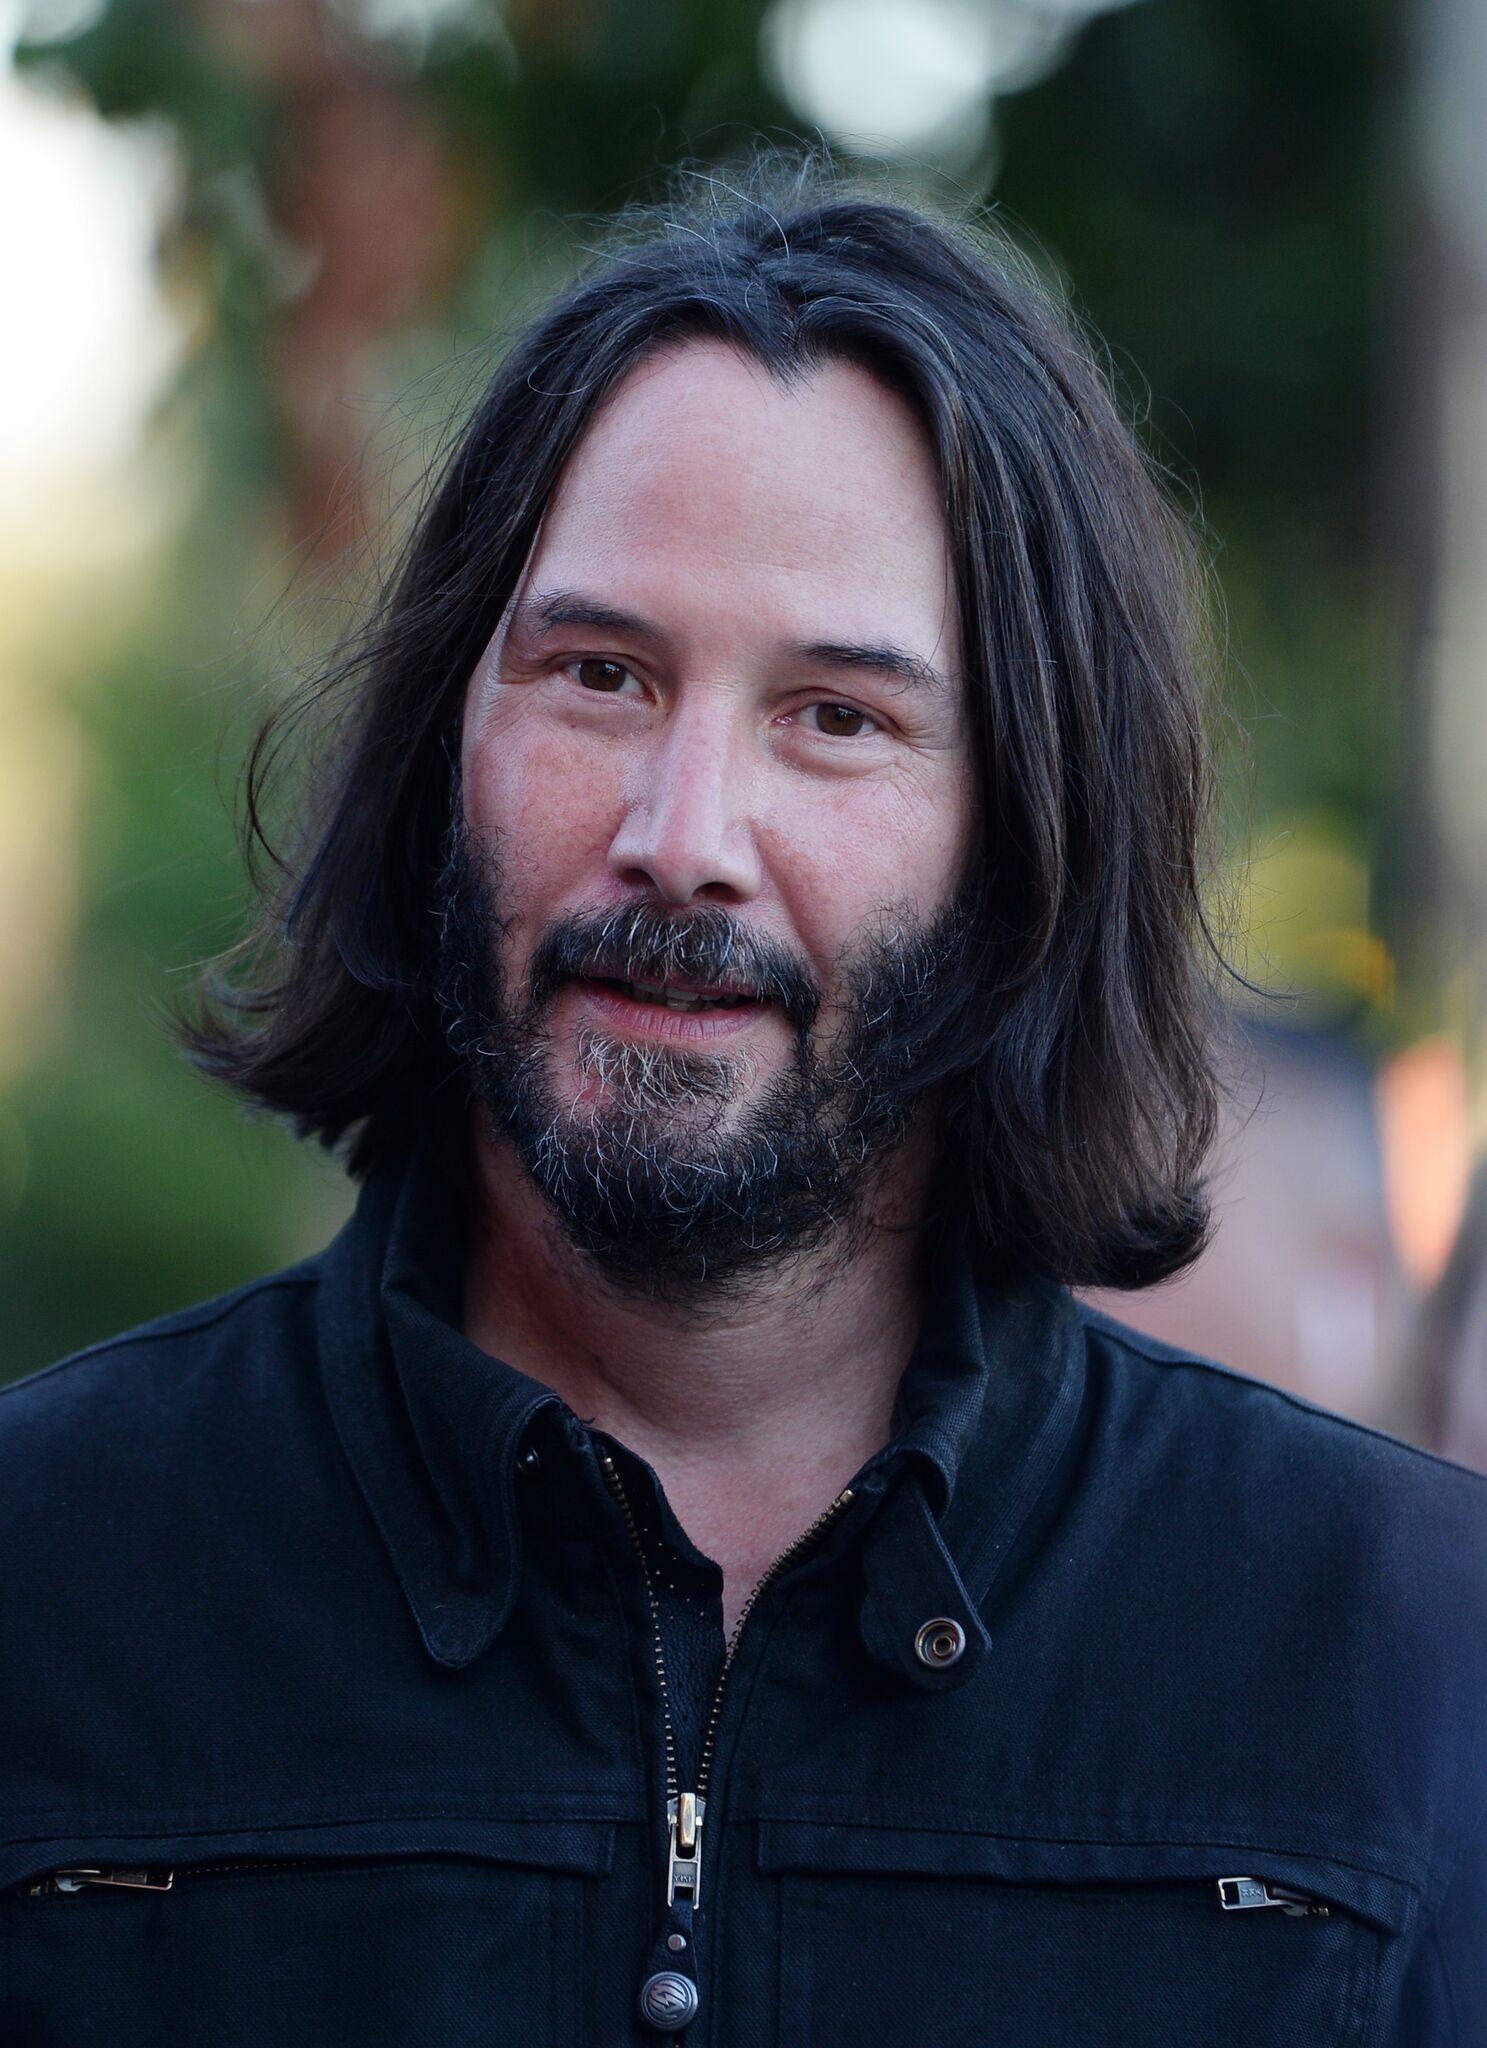 Keanu Reeves arrives at the LA Special Screening of Amazon's "Too Old To Die Young" at the Vista Theatre | Getty Images